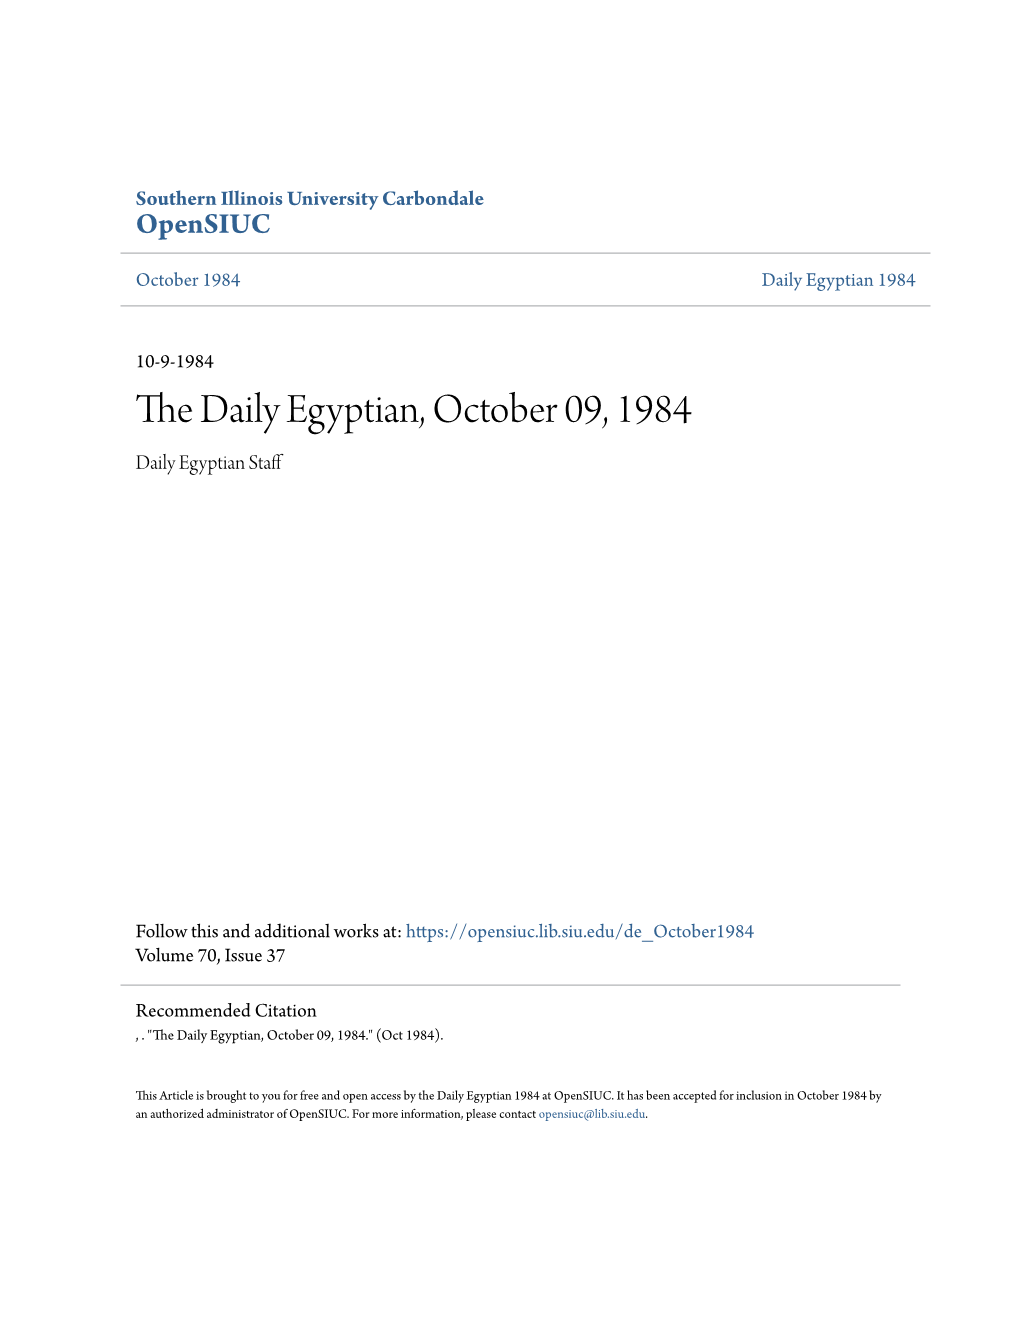 The Daily Egyptian, October 09, 1984